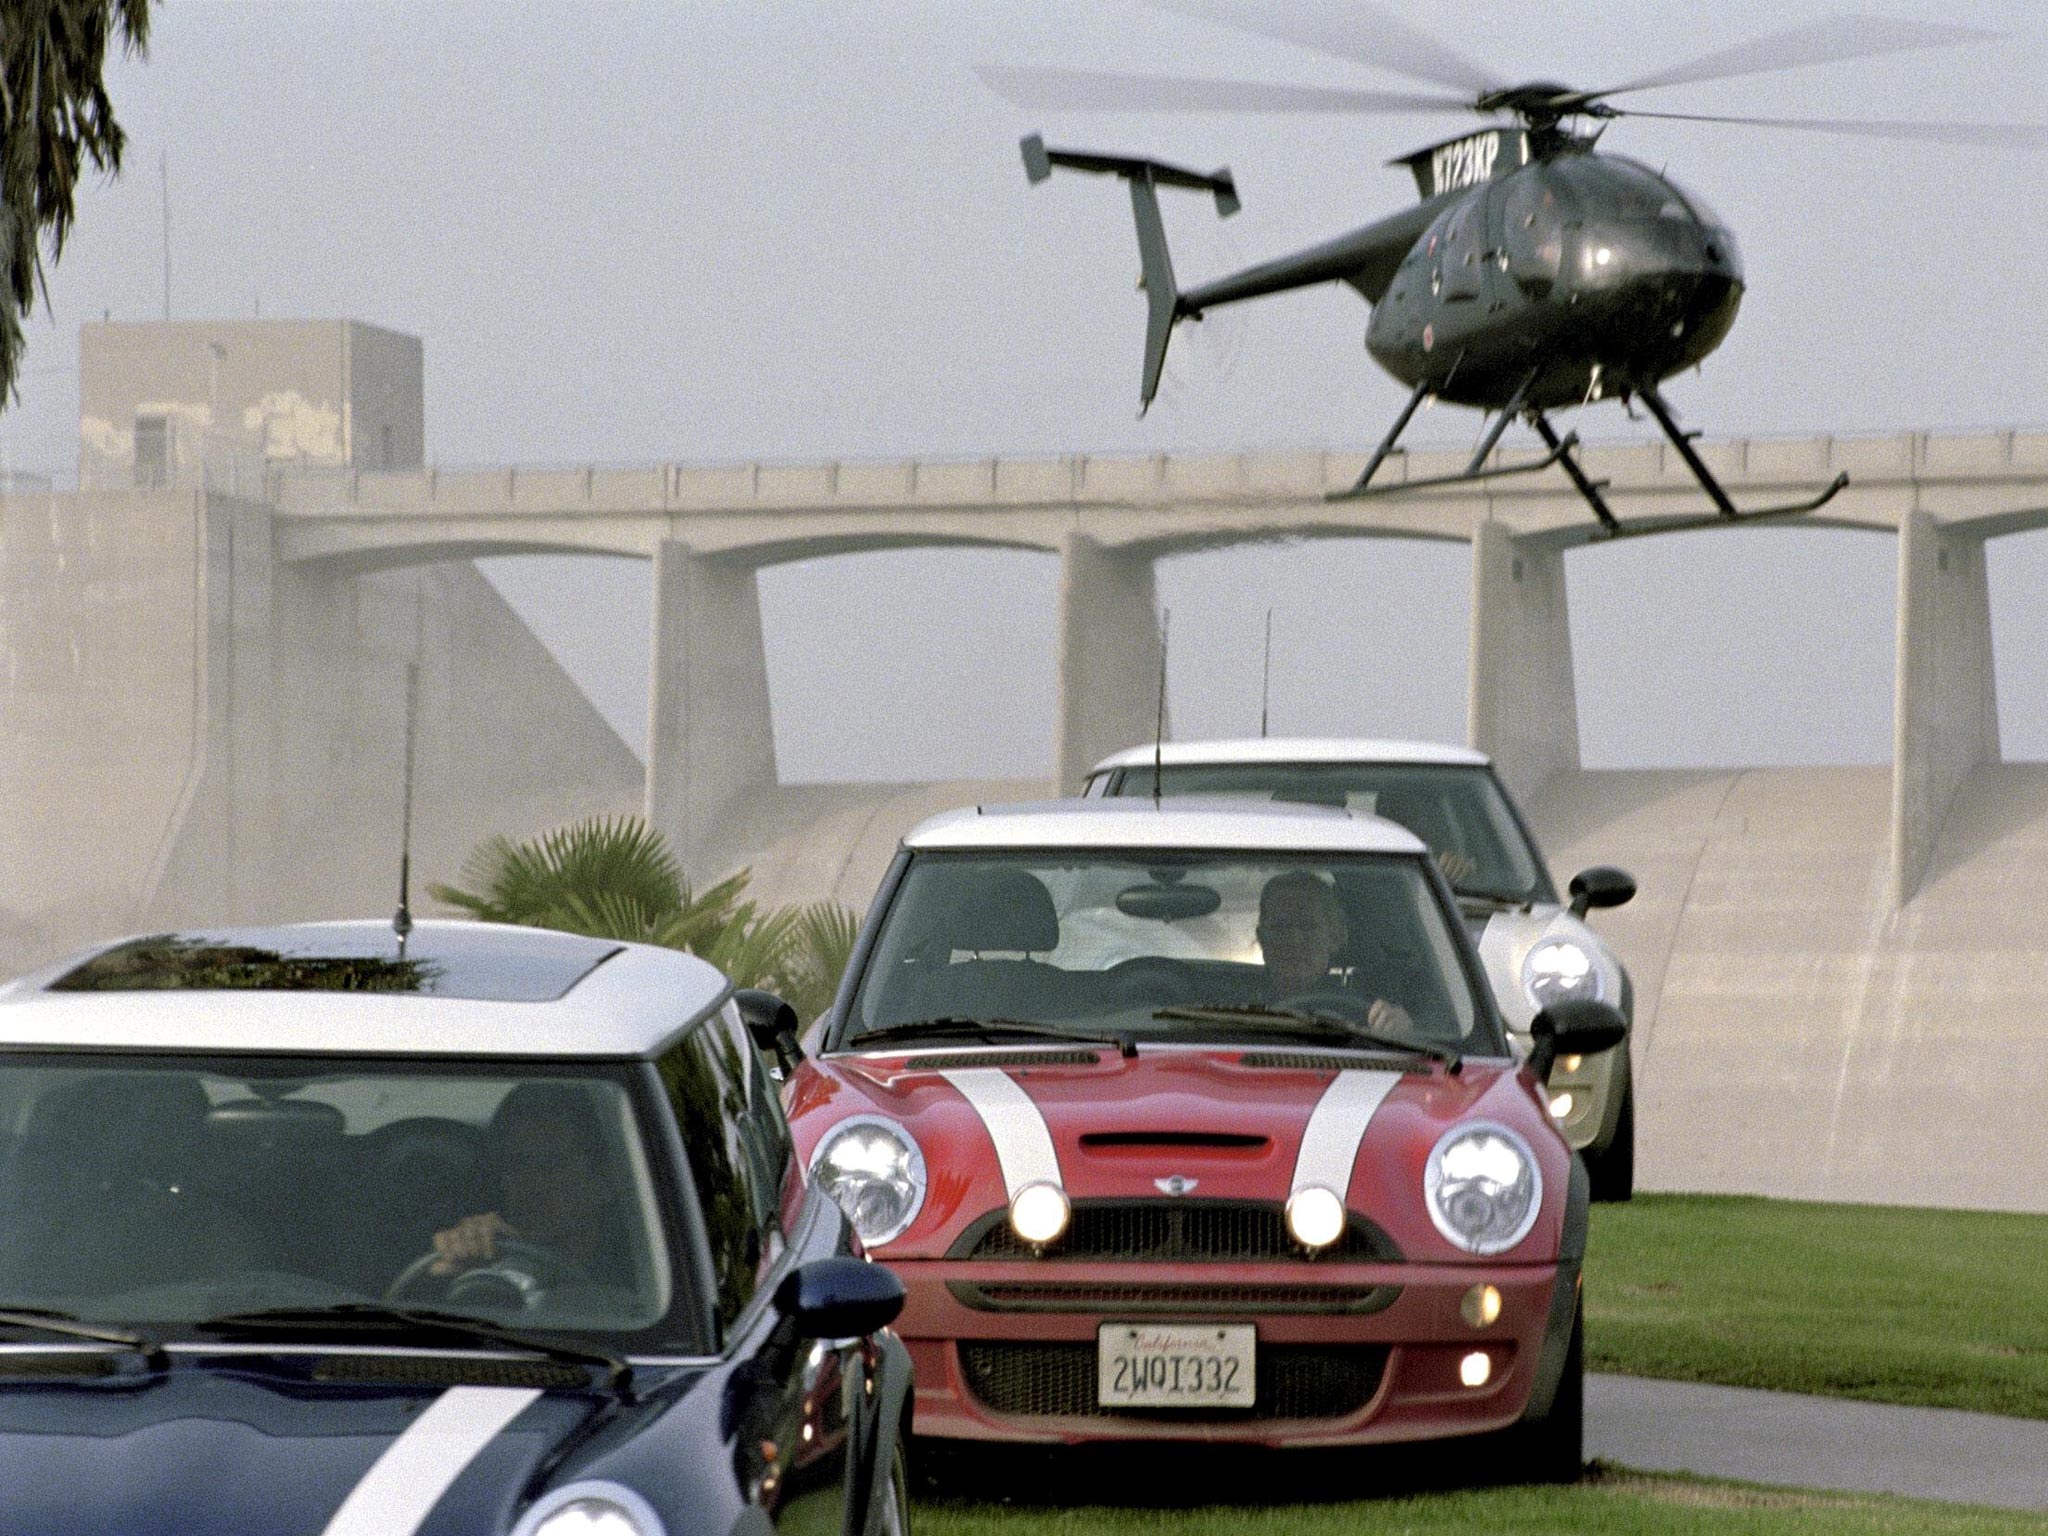 The quartet used Mini Coopers to make their getaway like the film 'The Italian Job' (pictured)